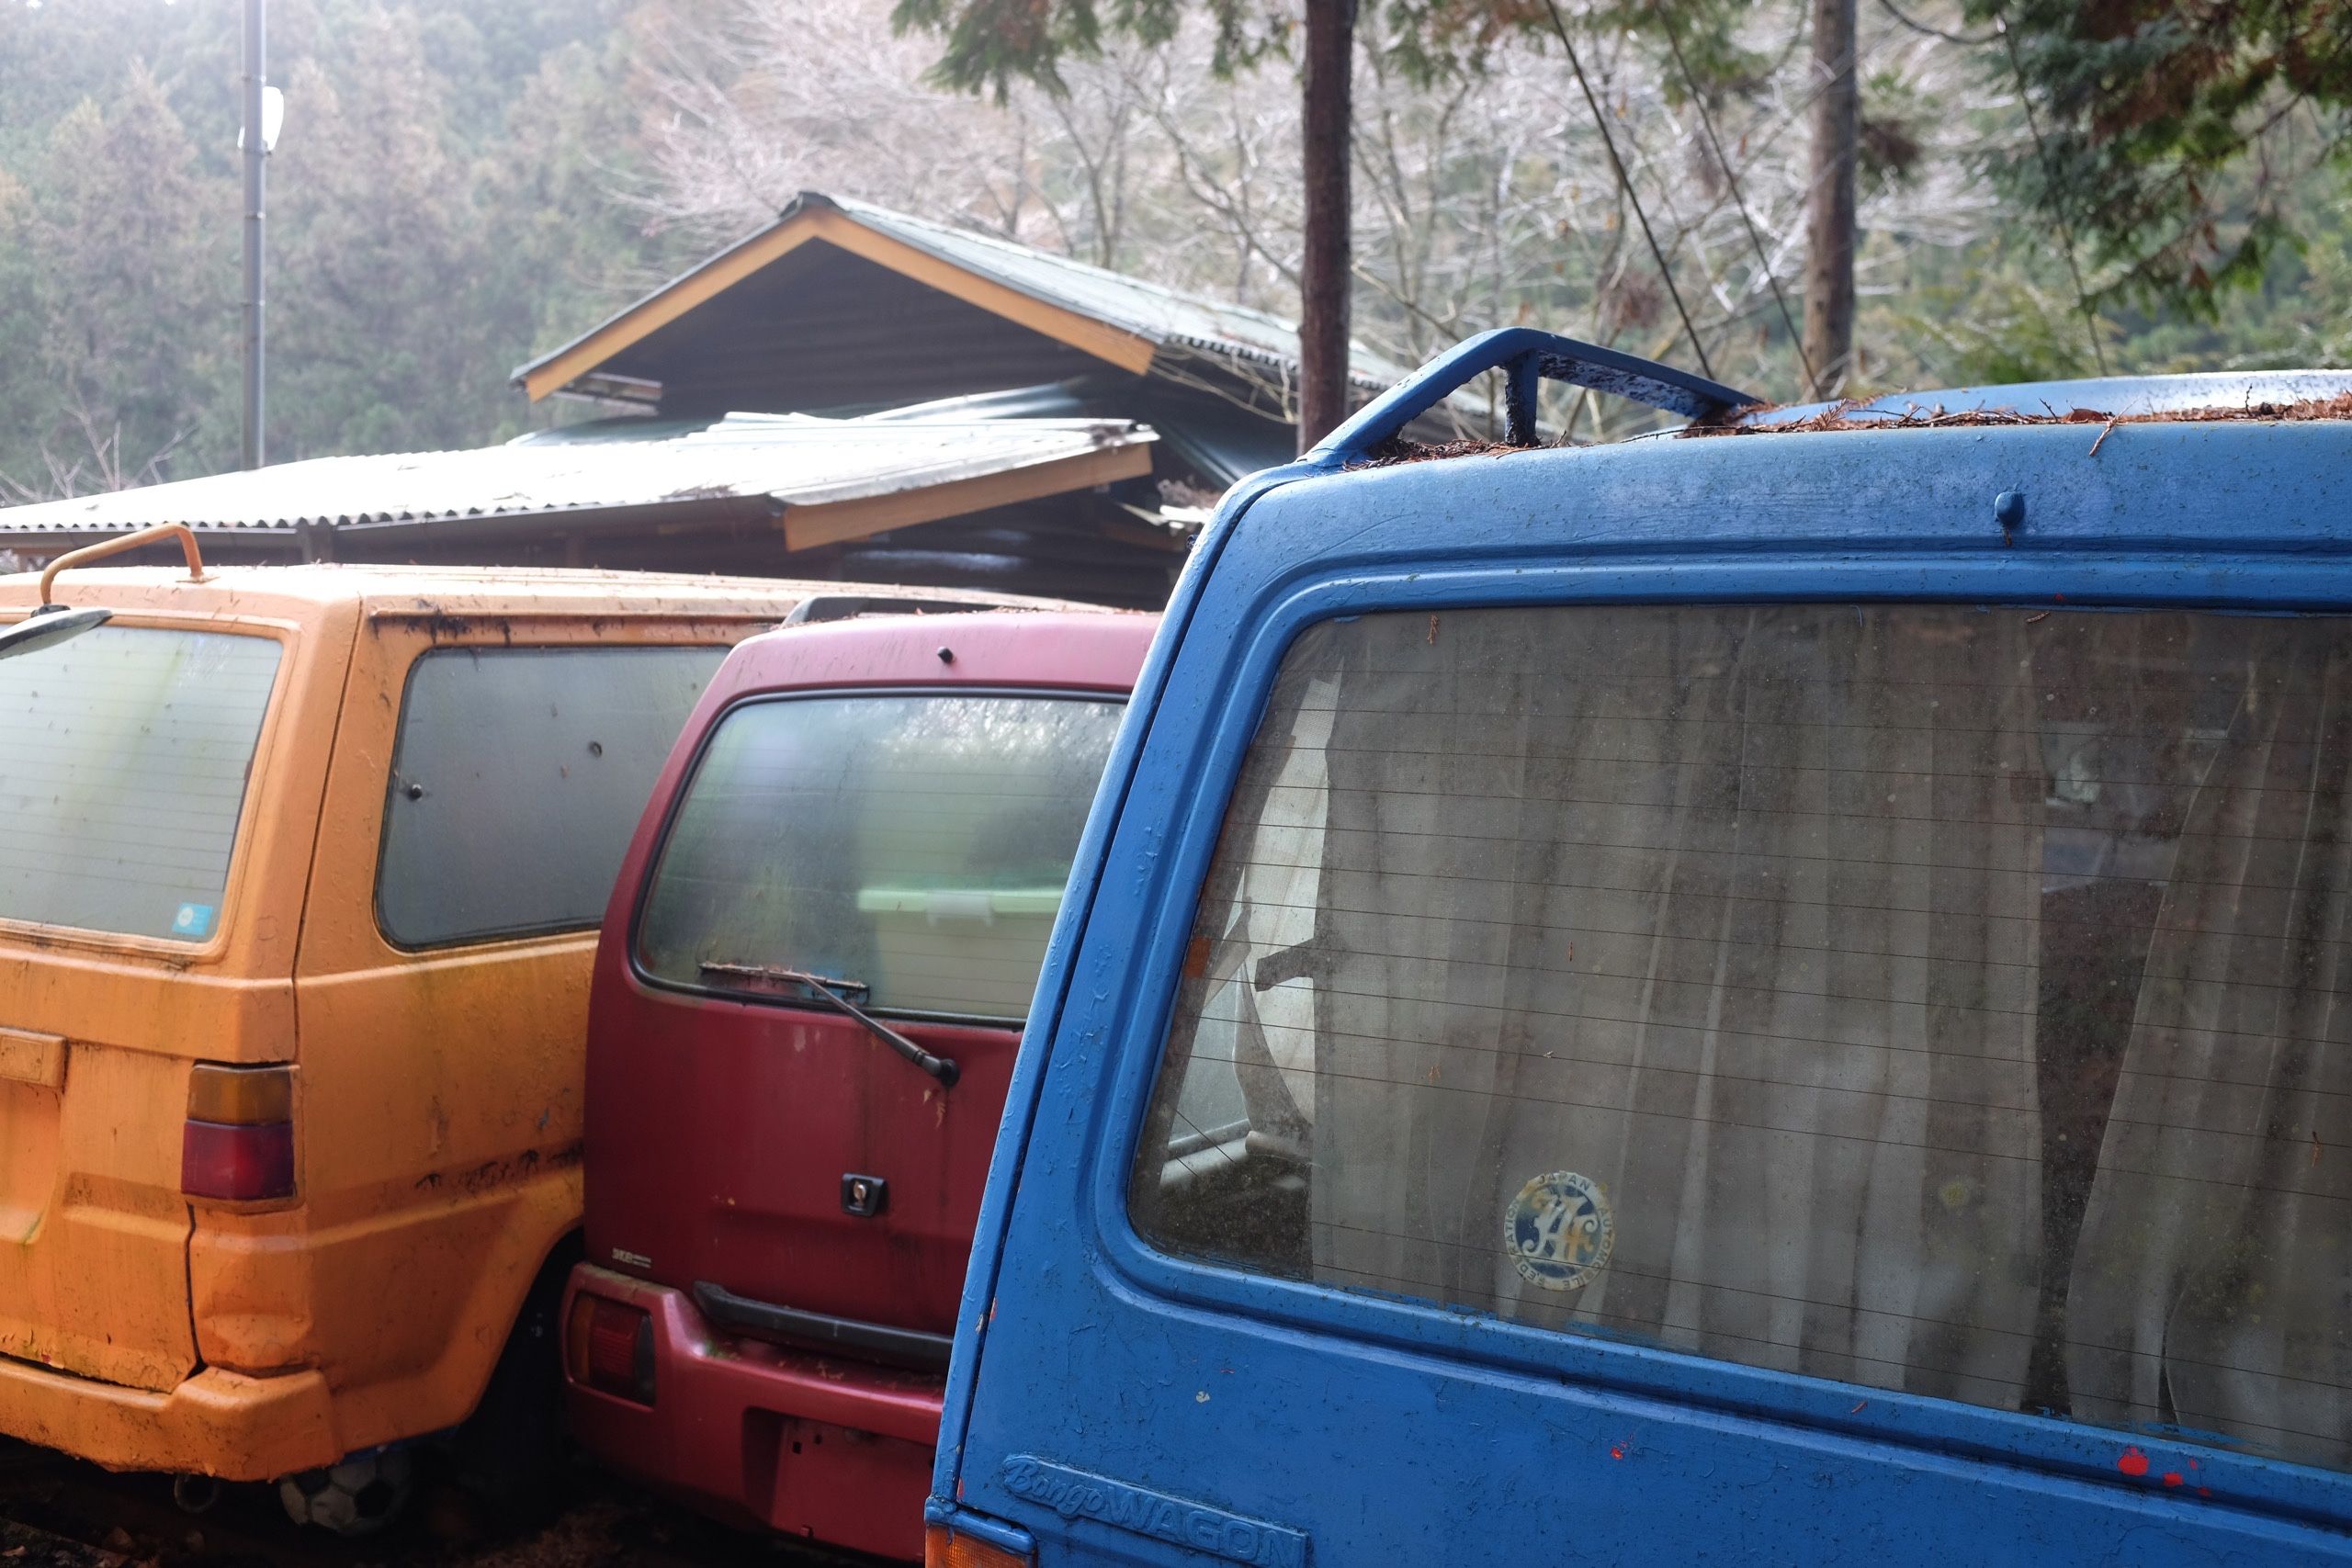 An orange, a red, and a blue microvan parked next to each other.